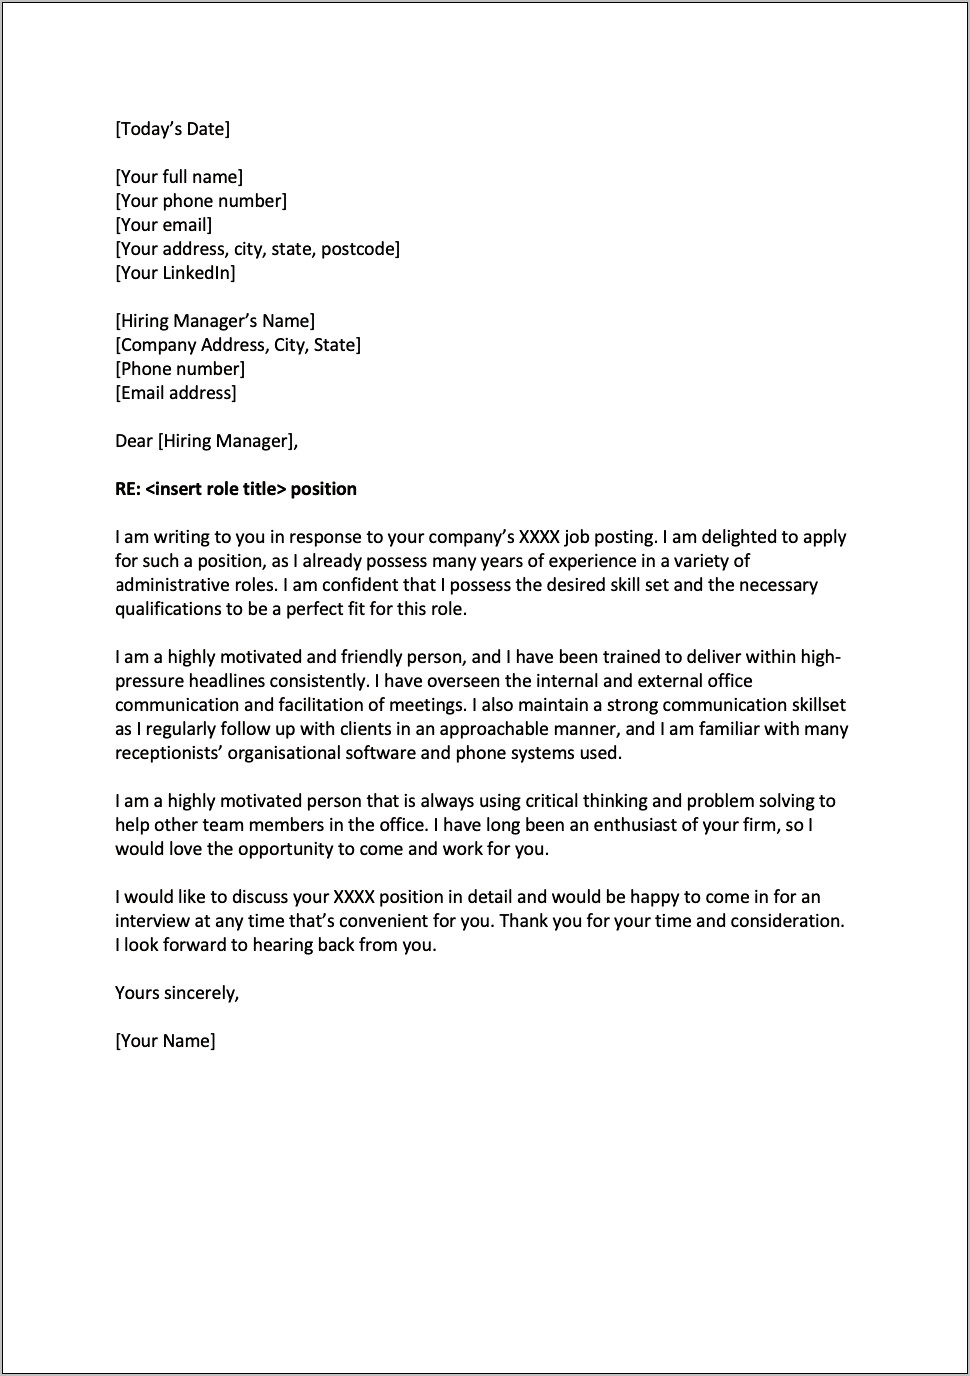 Resume Cover Letter For Office Receptionist Position